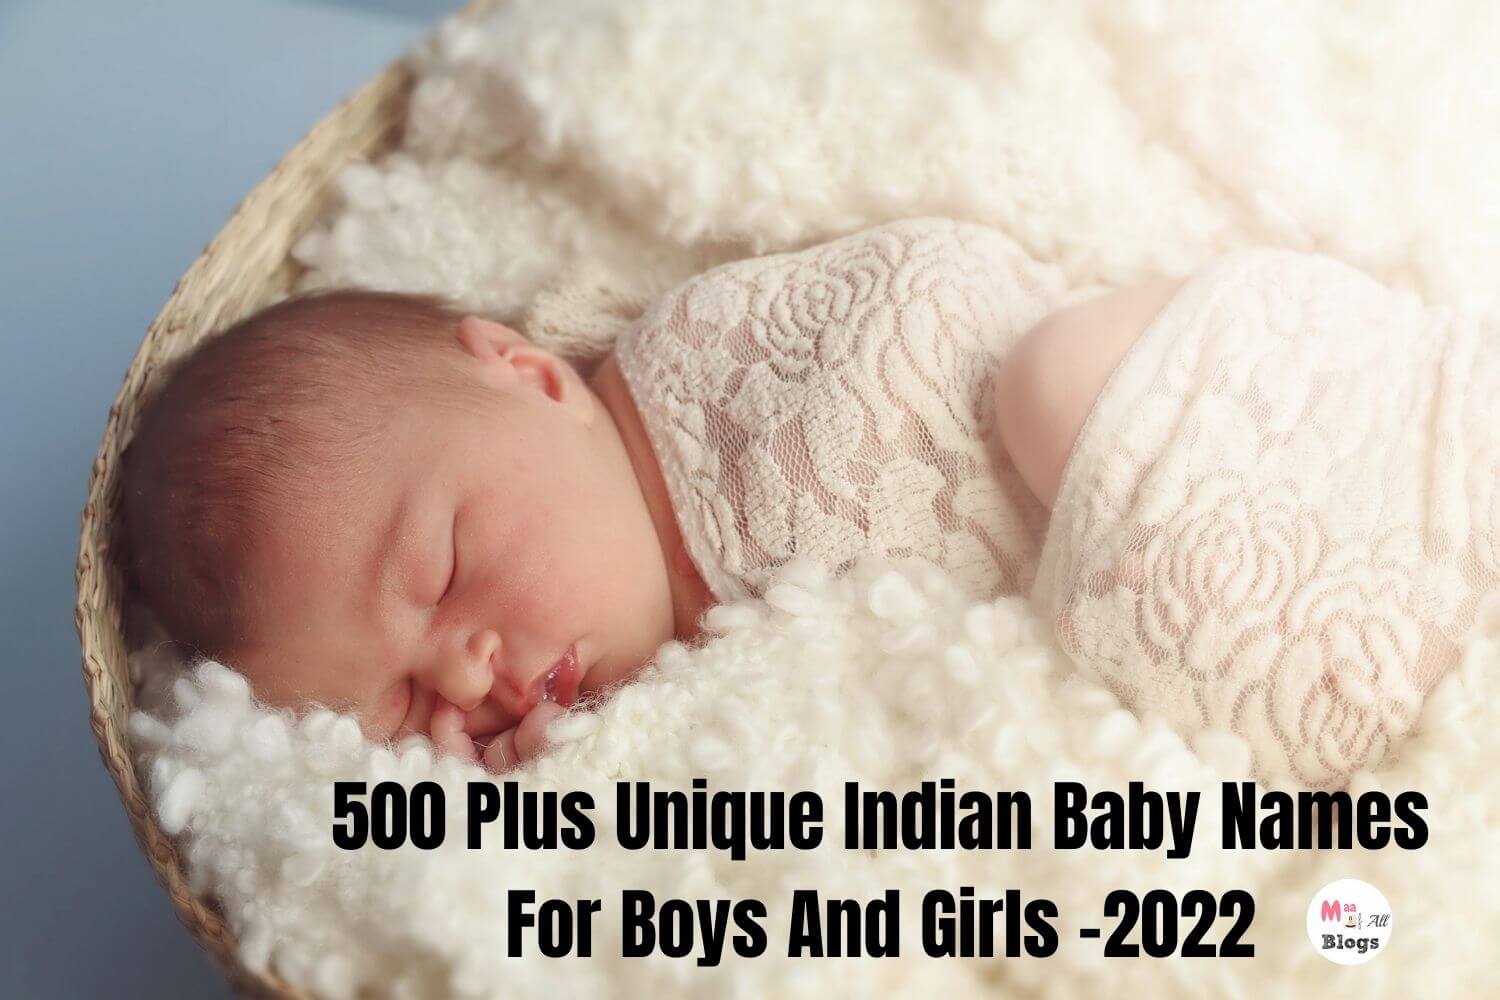 500 Plus Unique Indian Baby Names For Boys And Girls -2022 